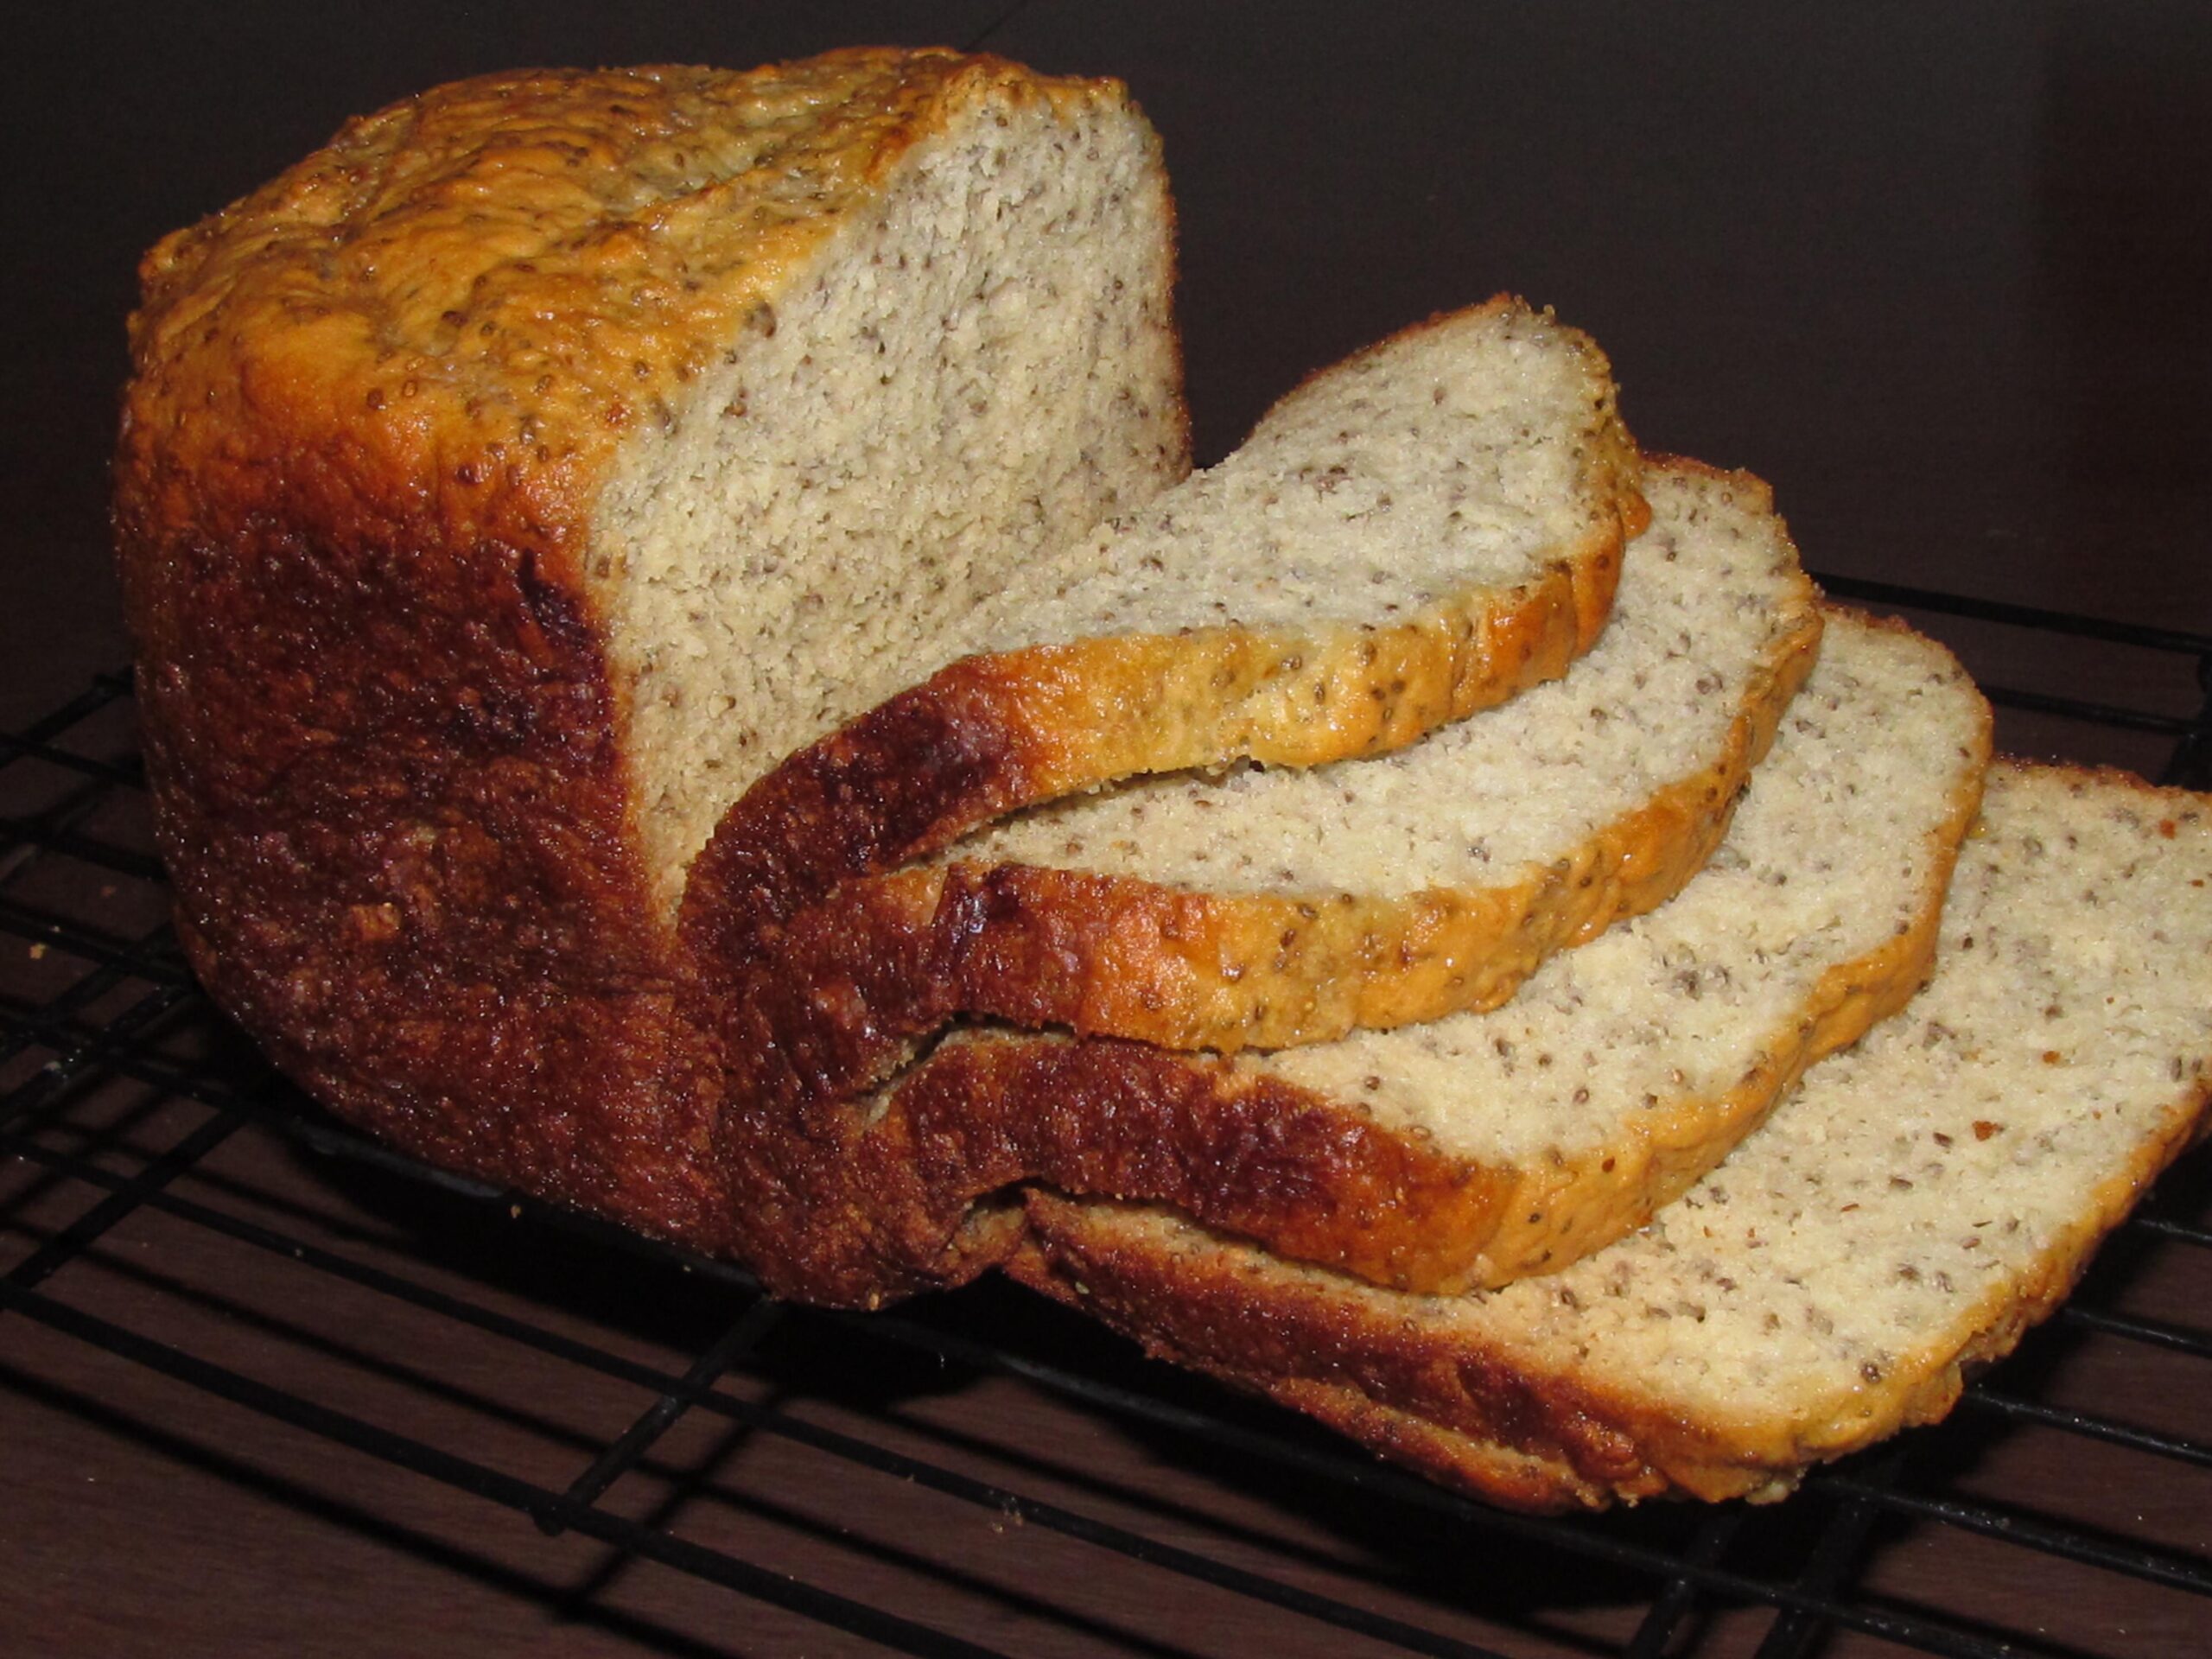  Who said gluten-free bread can't be delicious?